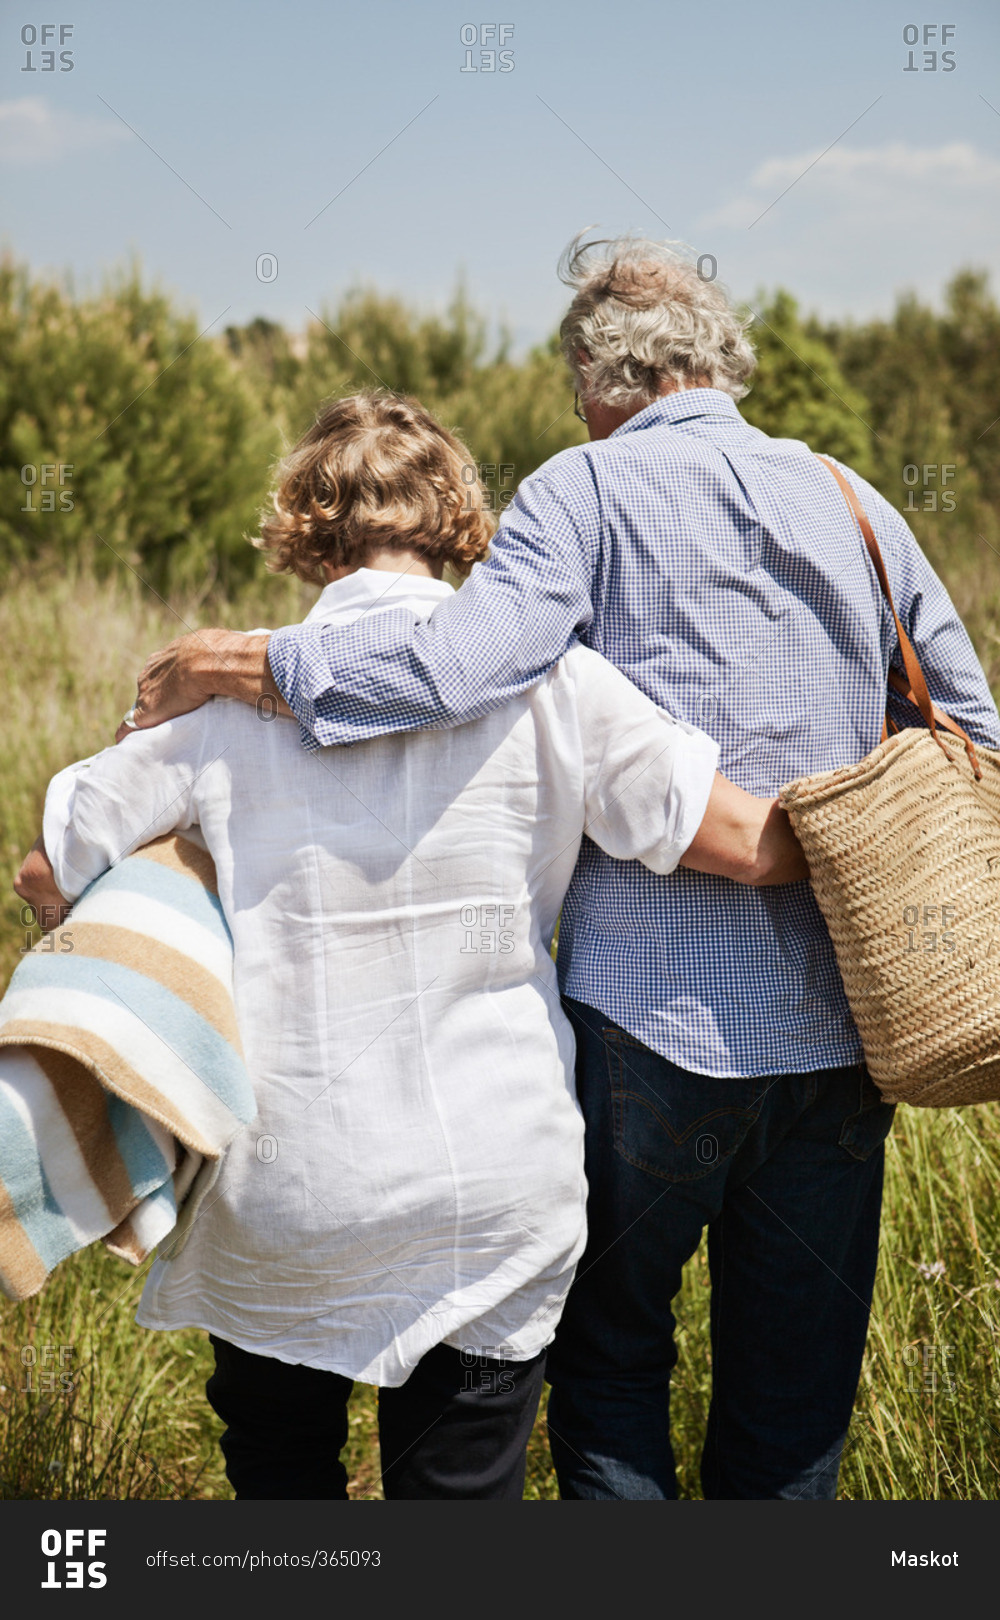 Couple with picnic basket and blanket going for picnic